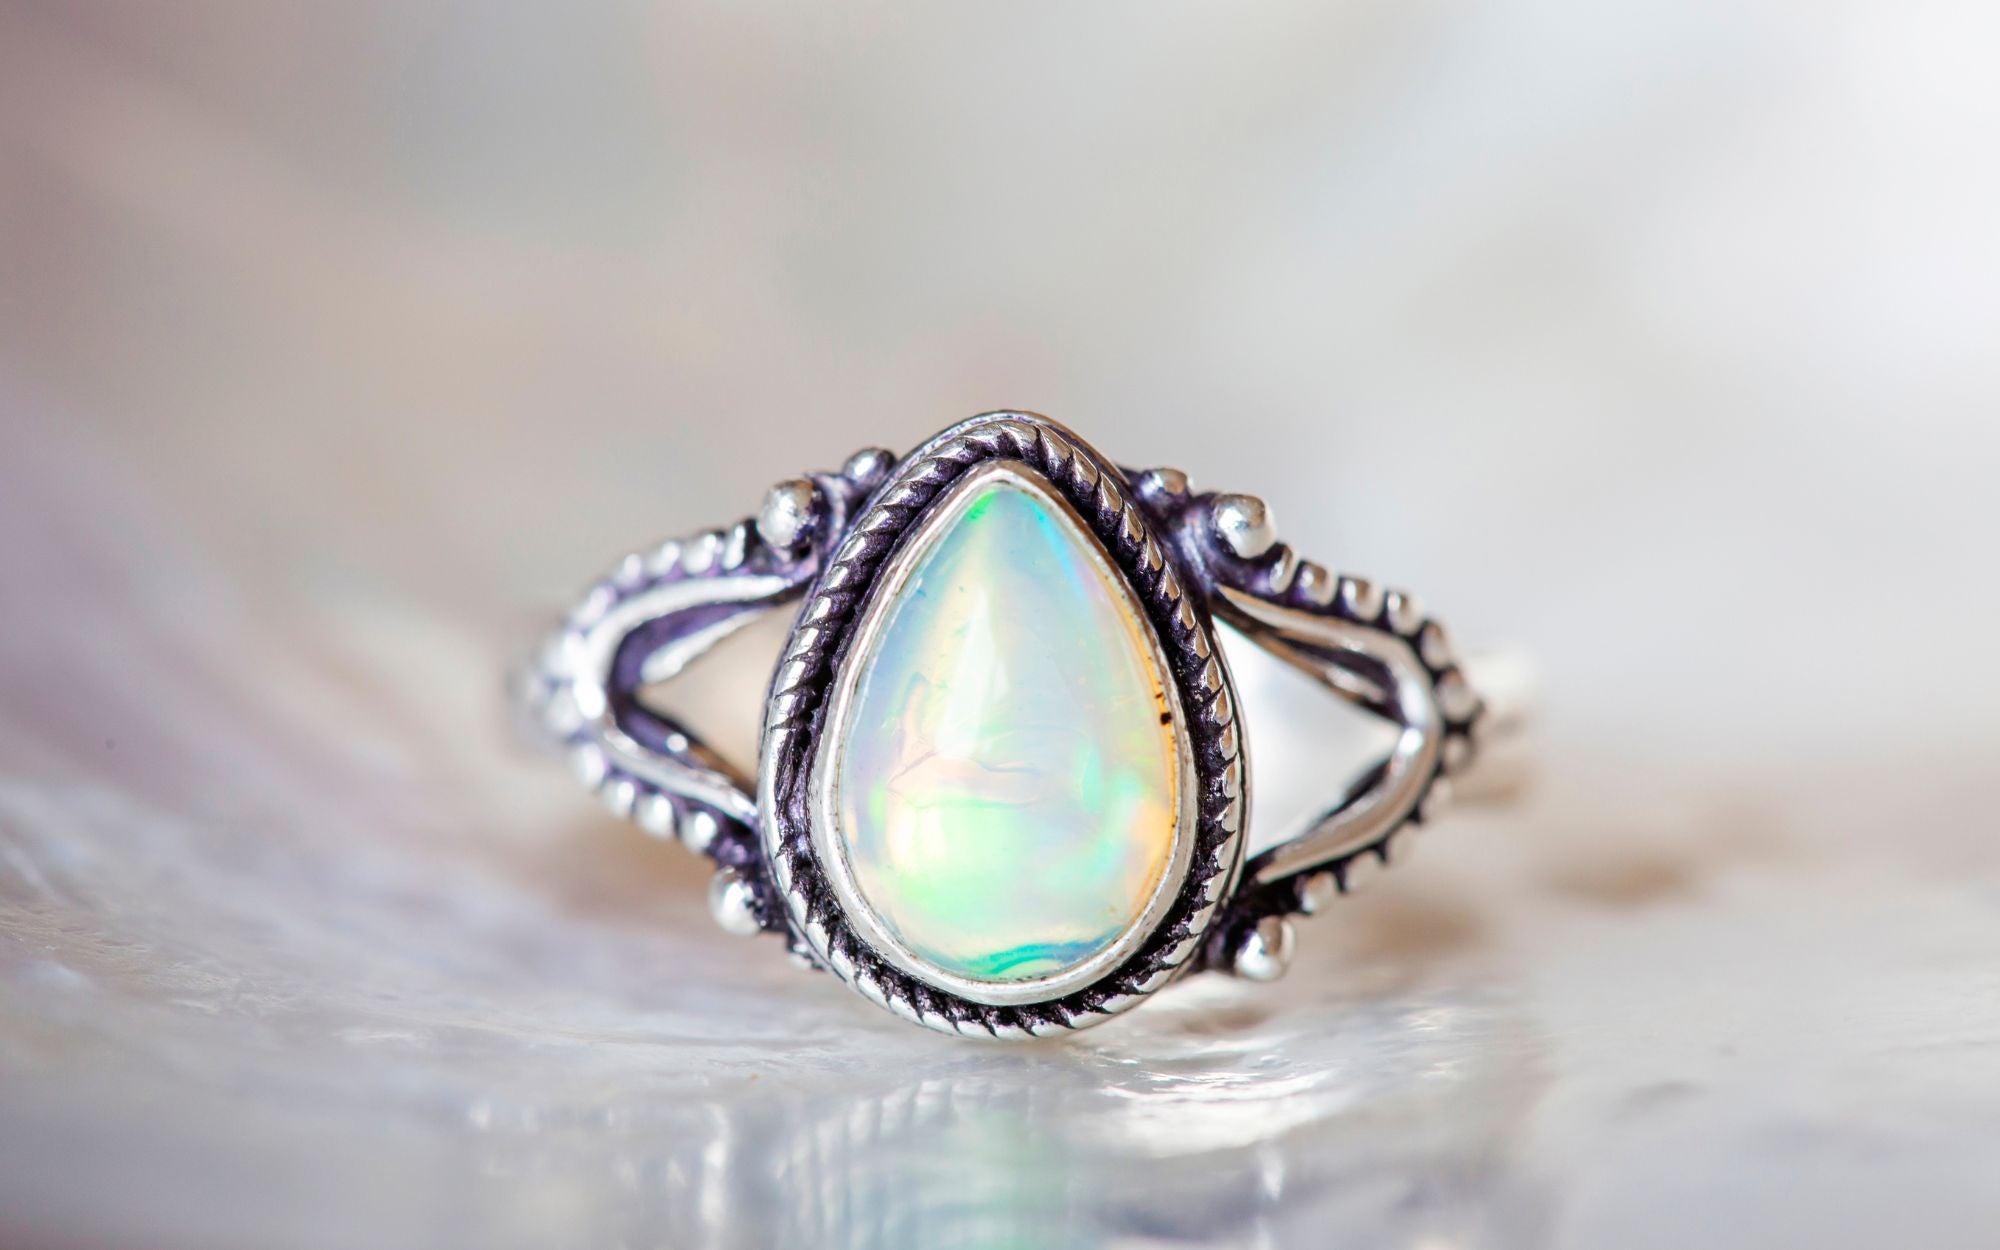 how much is opal worth - opal value